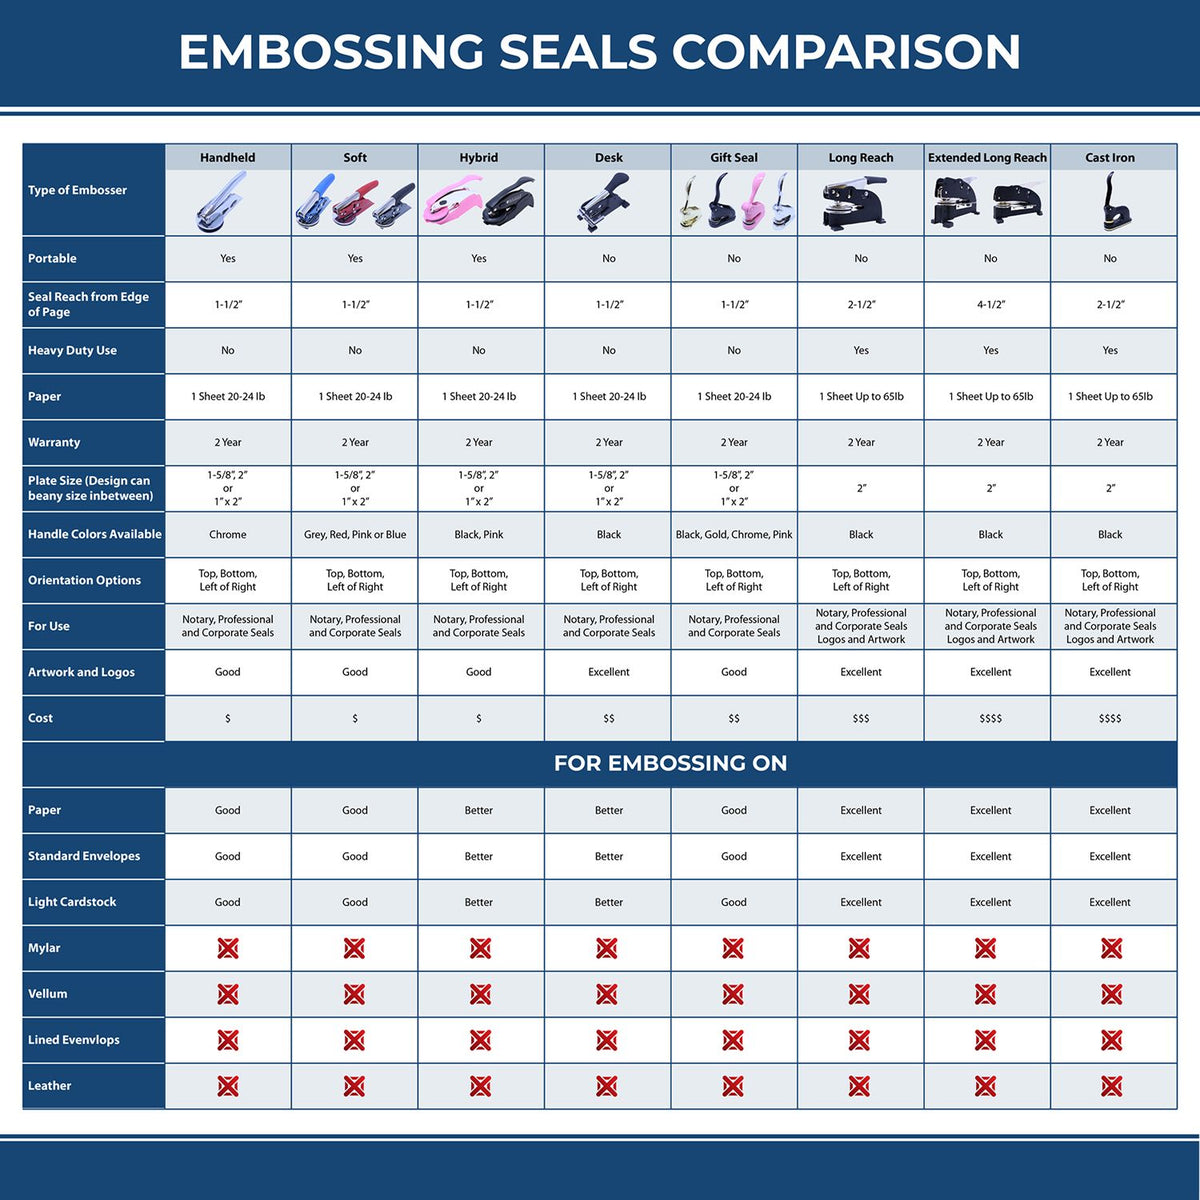 A comparison chart for the different types of mount models available for the Long Reach Texas PE Seal.